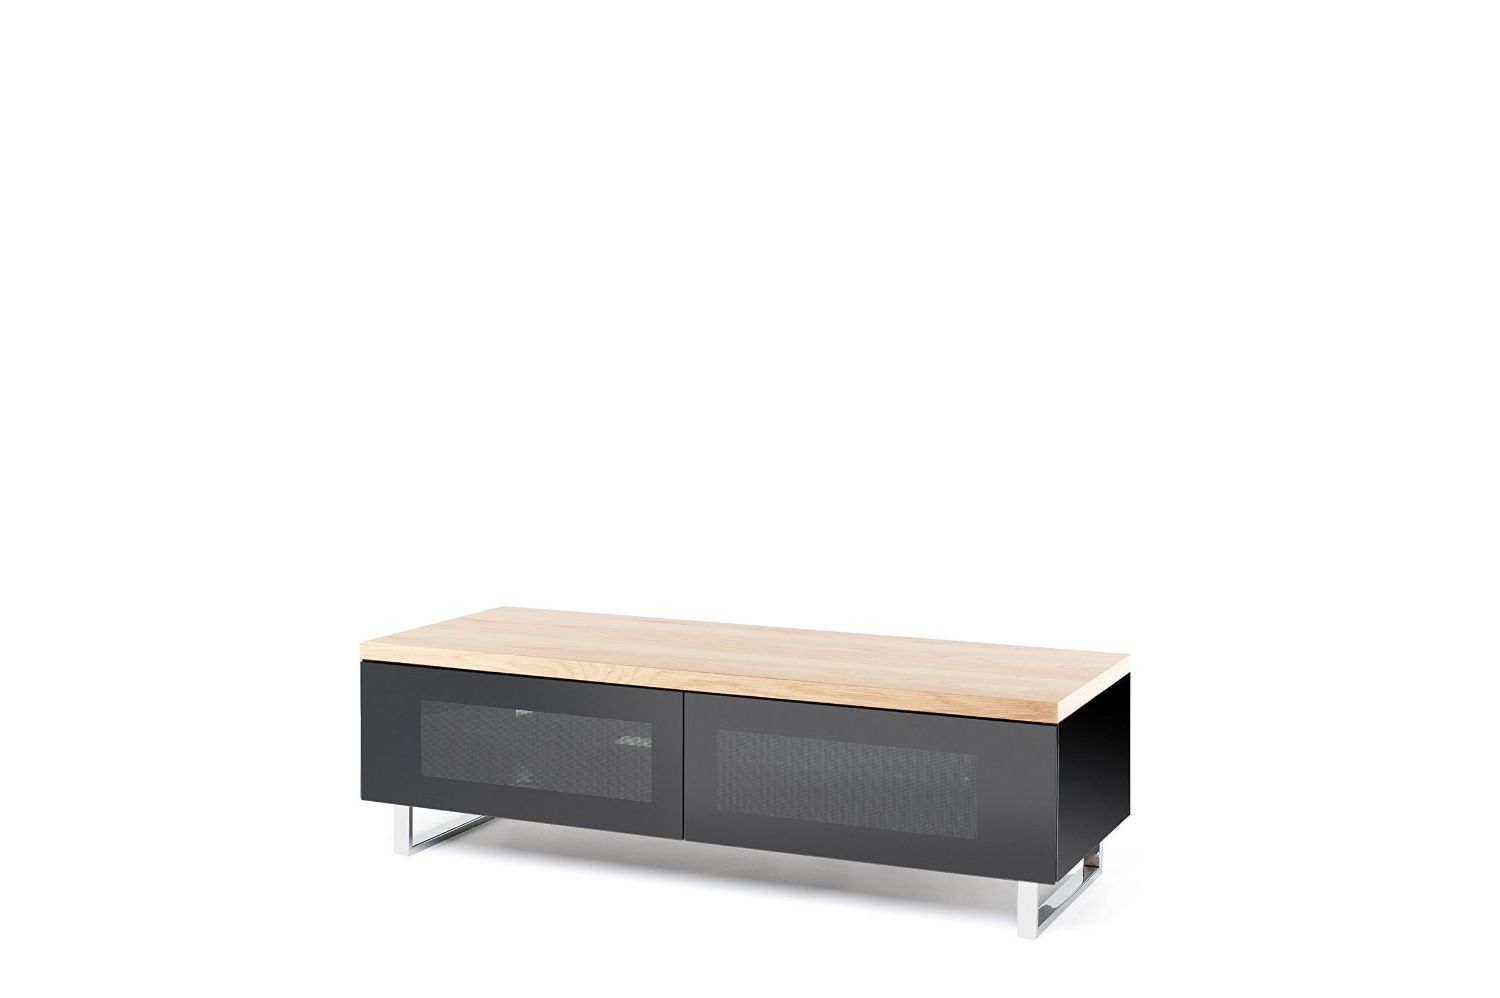 Buy Techlink Panorama Tv Stand With High Gloss Base With Walnut Top Regarding Current Techlink Panorama Walnut Tv Stands (View 17 of 20)